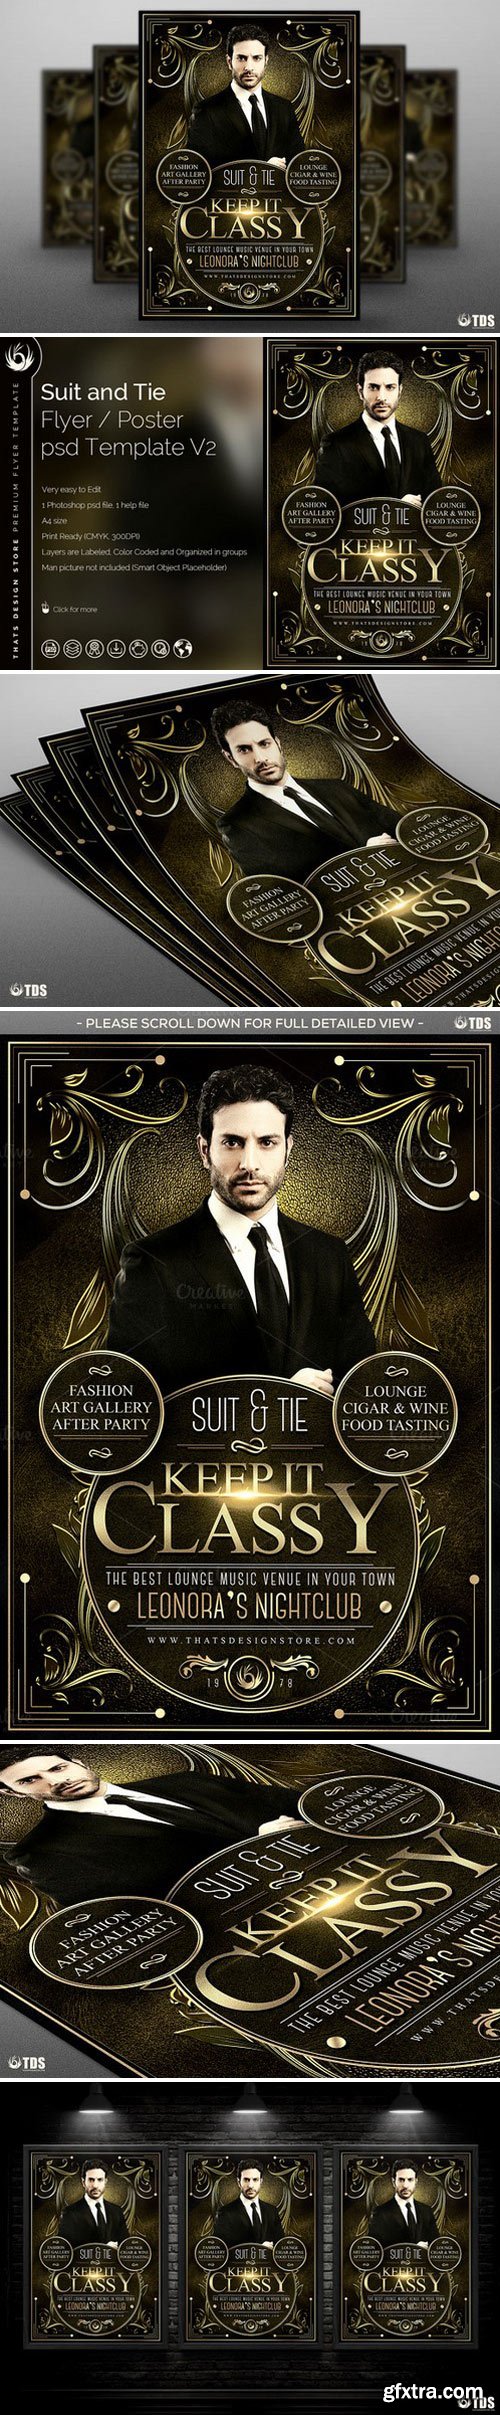 CreativeMarket - Suit and Tie Flyer Template V2 566254